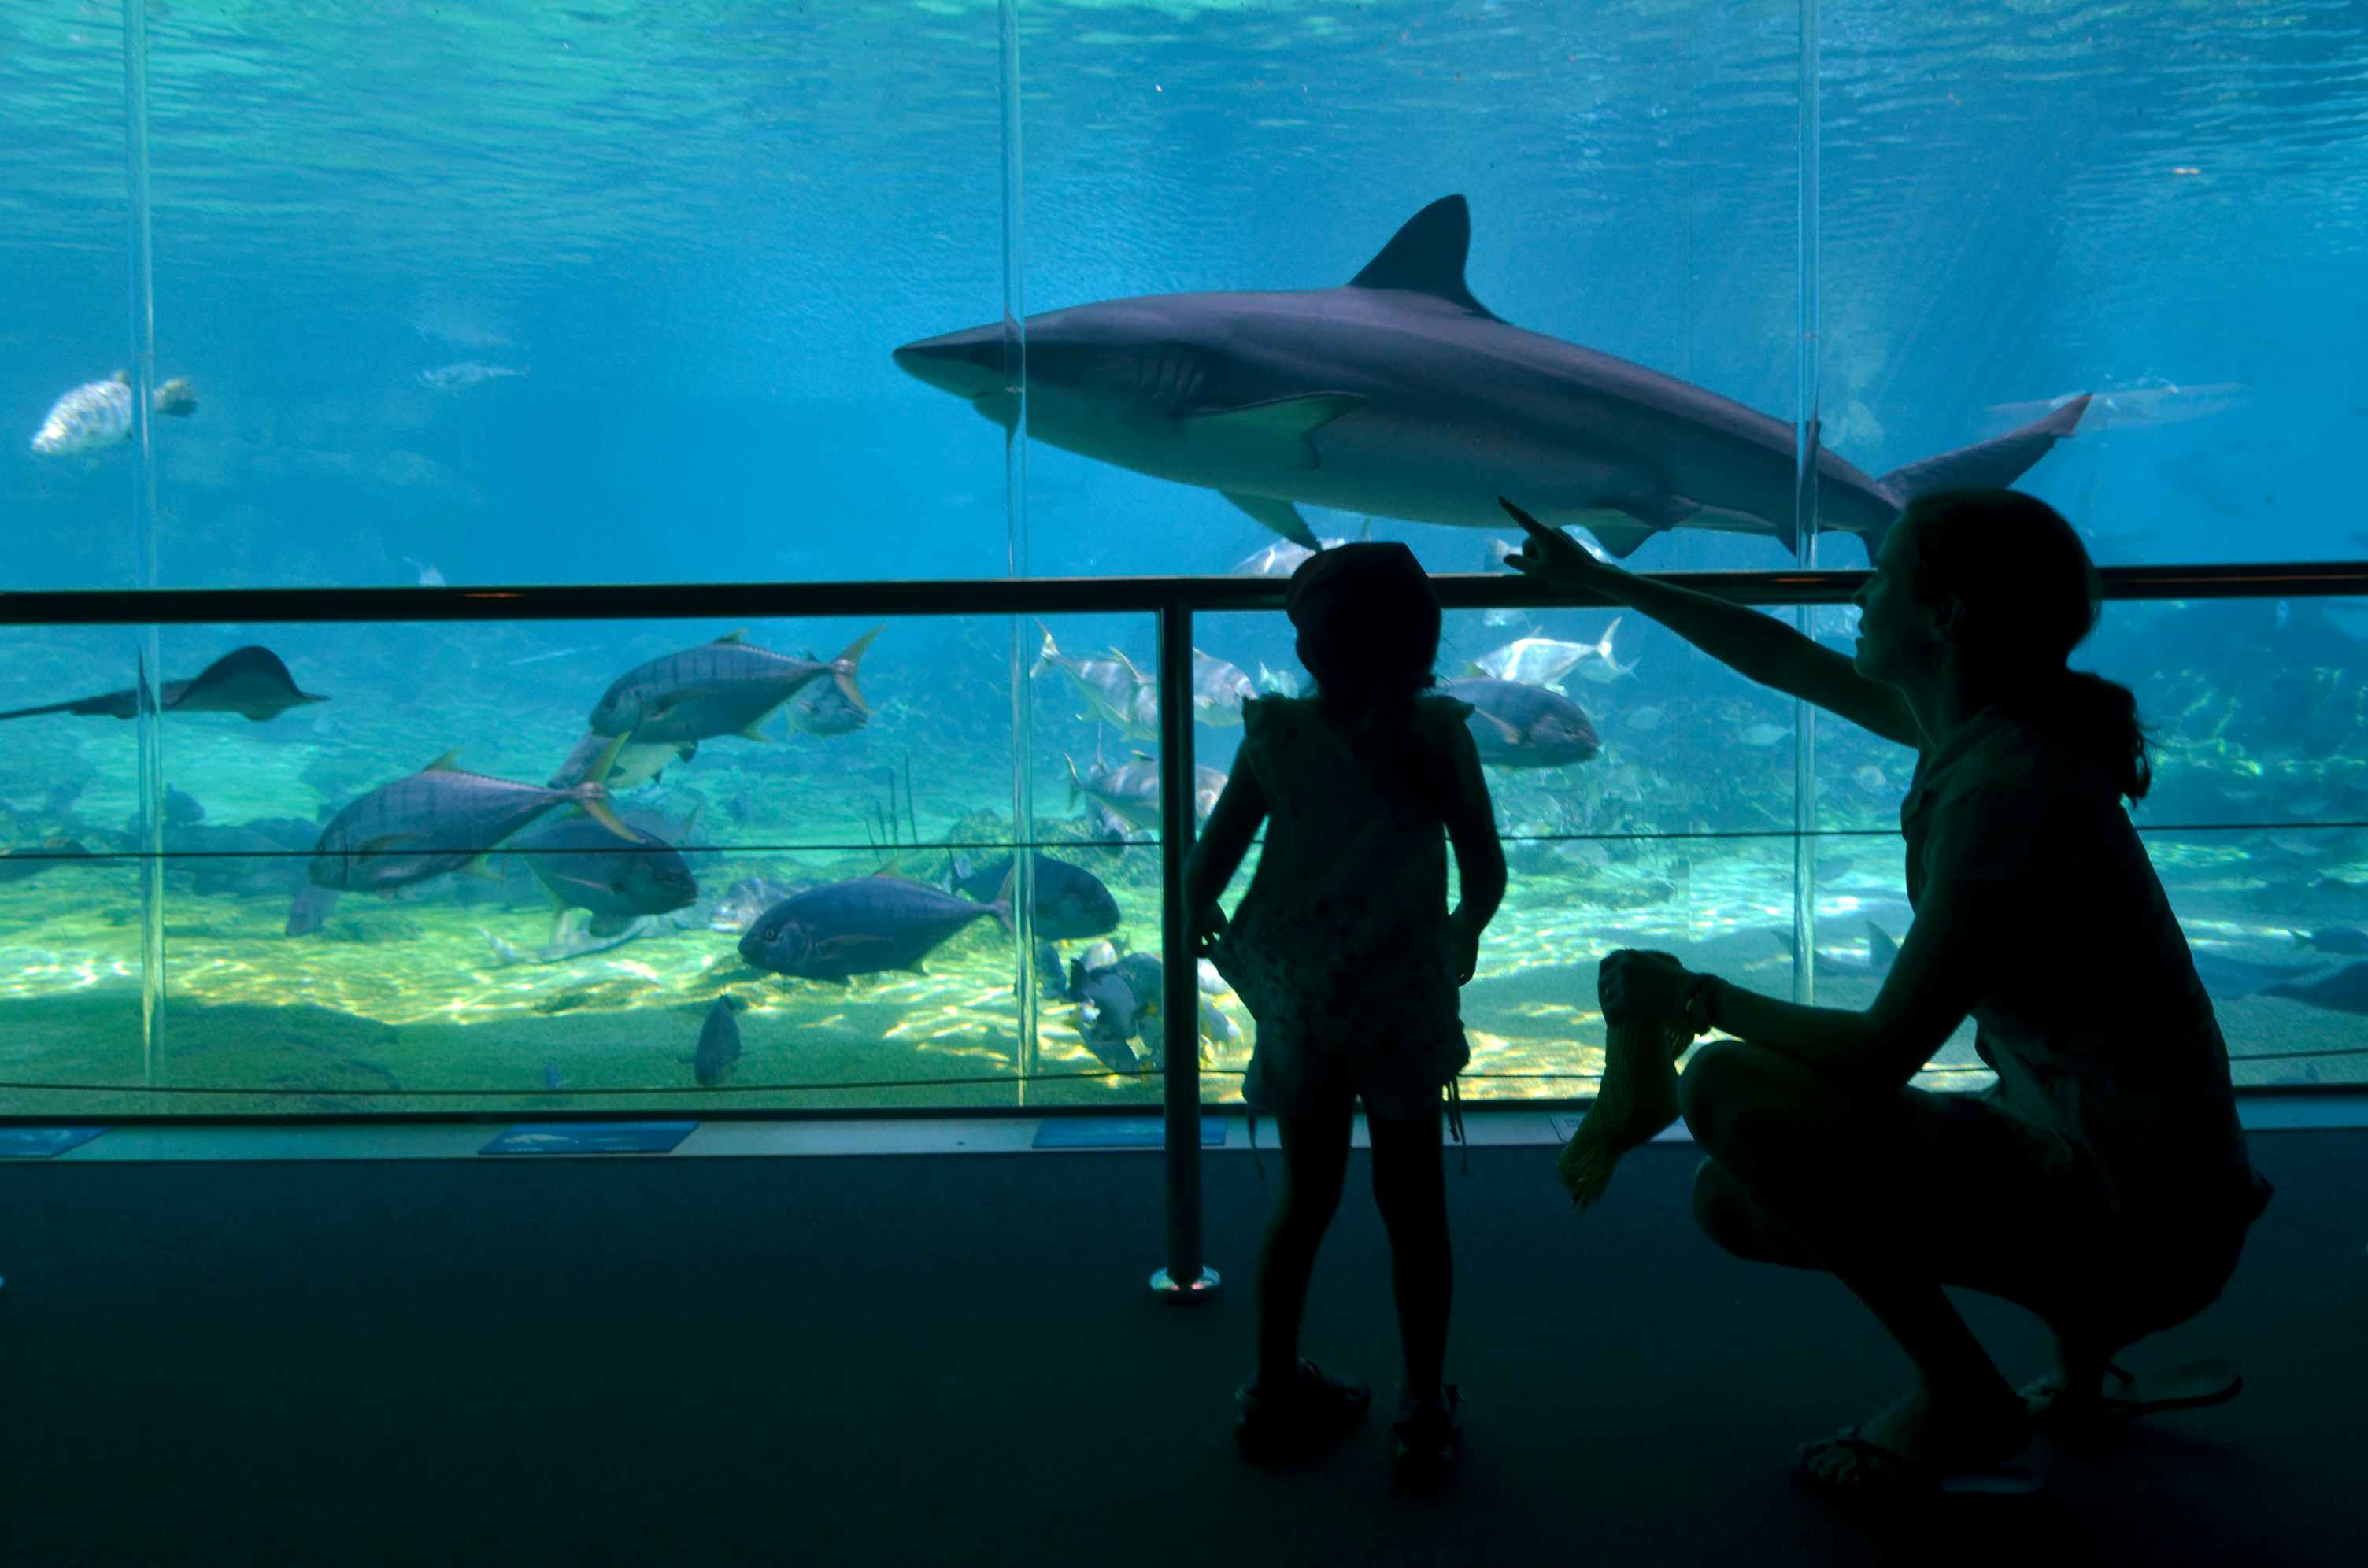 A parent and child looking through the glass of an aquarium at a shark swimming by